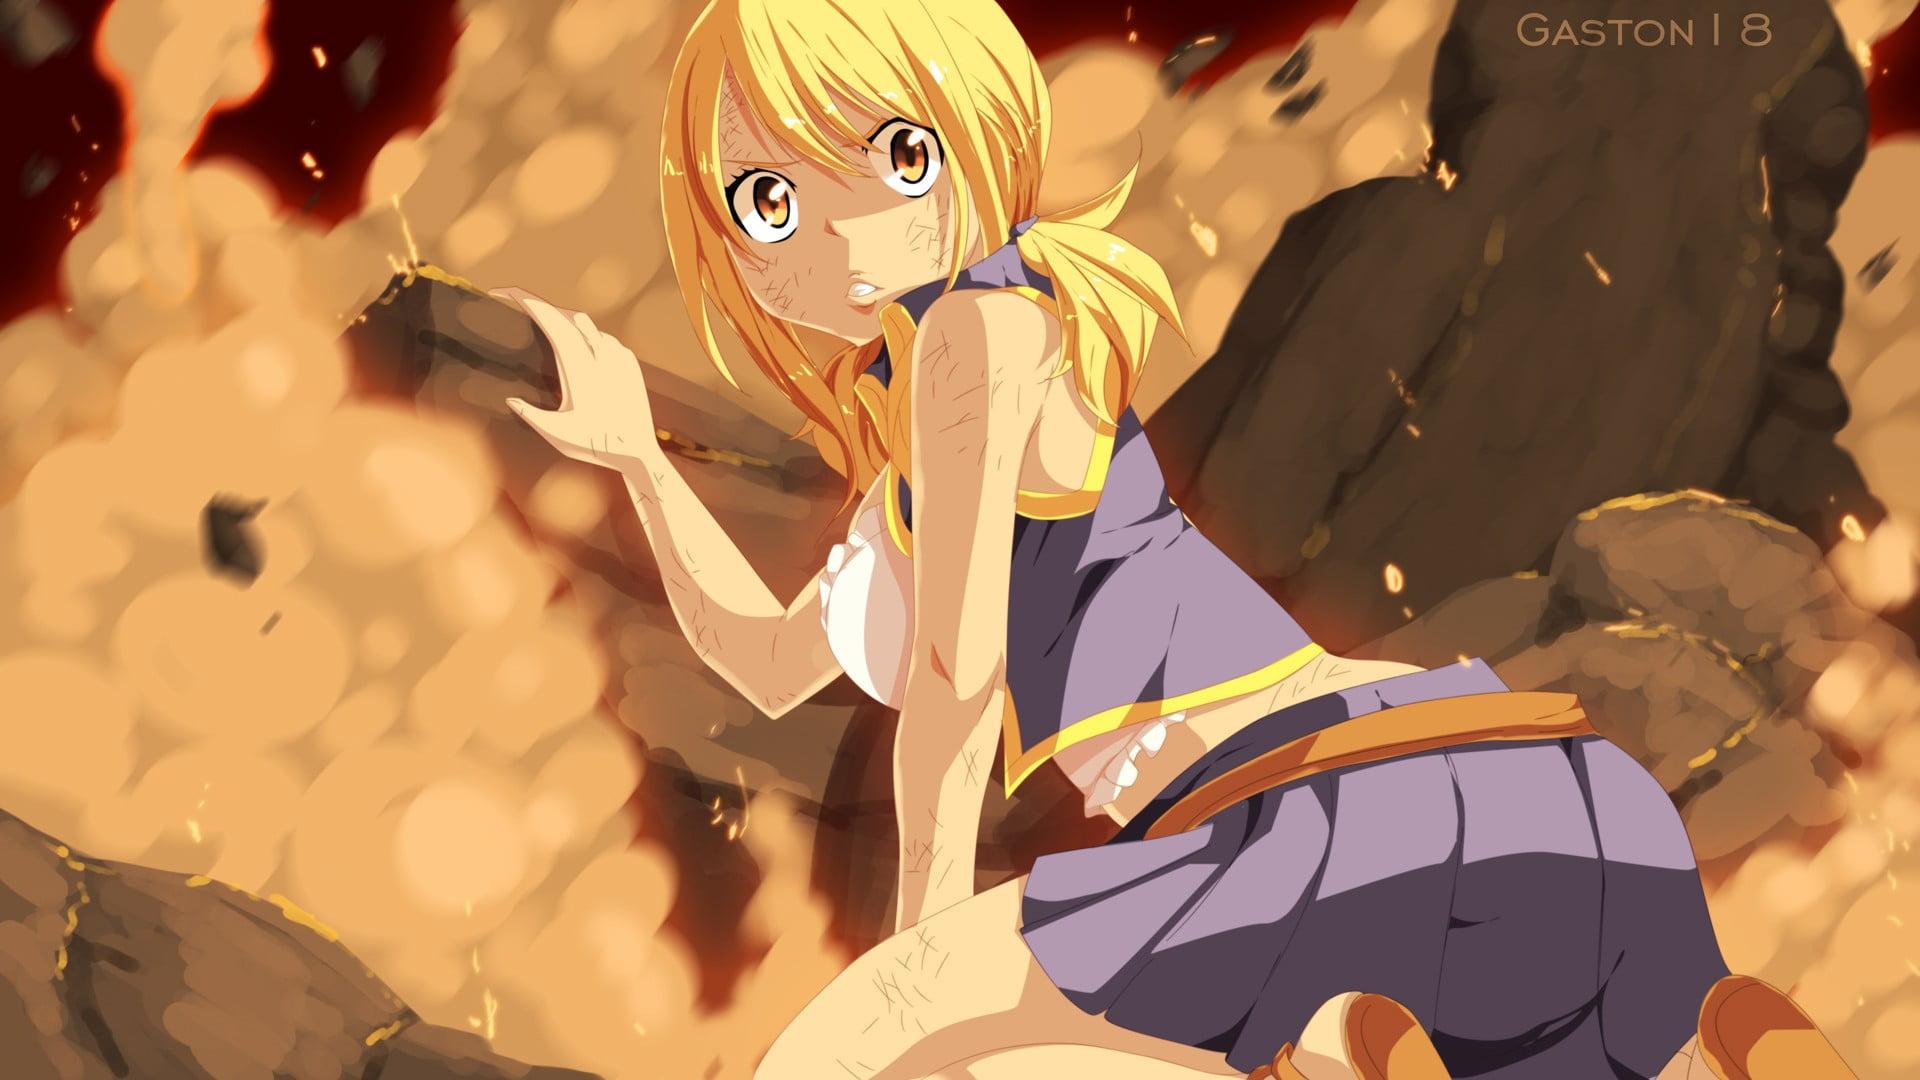 Fairy Tail Lucy Heartfilia Wallpapers Wallpaper Cave